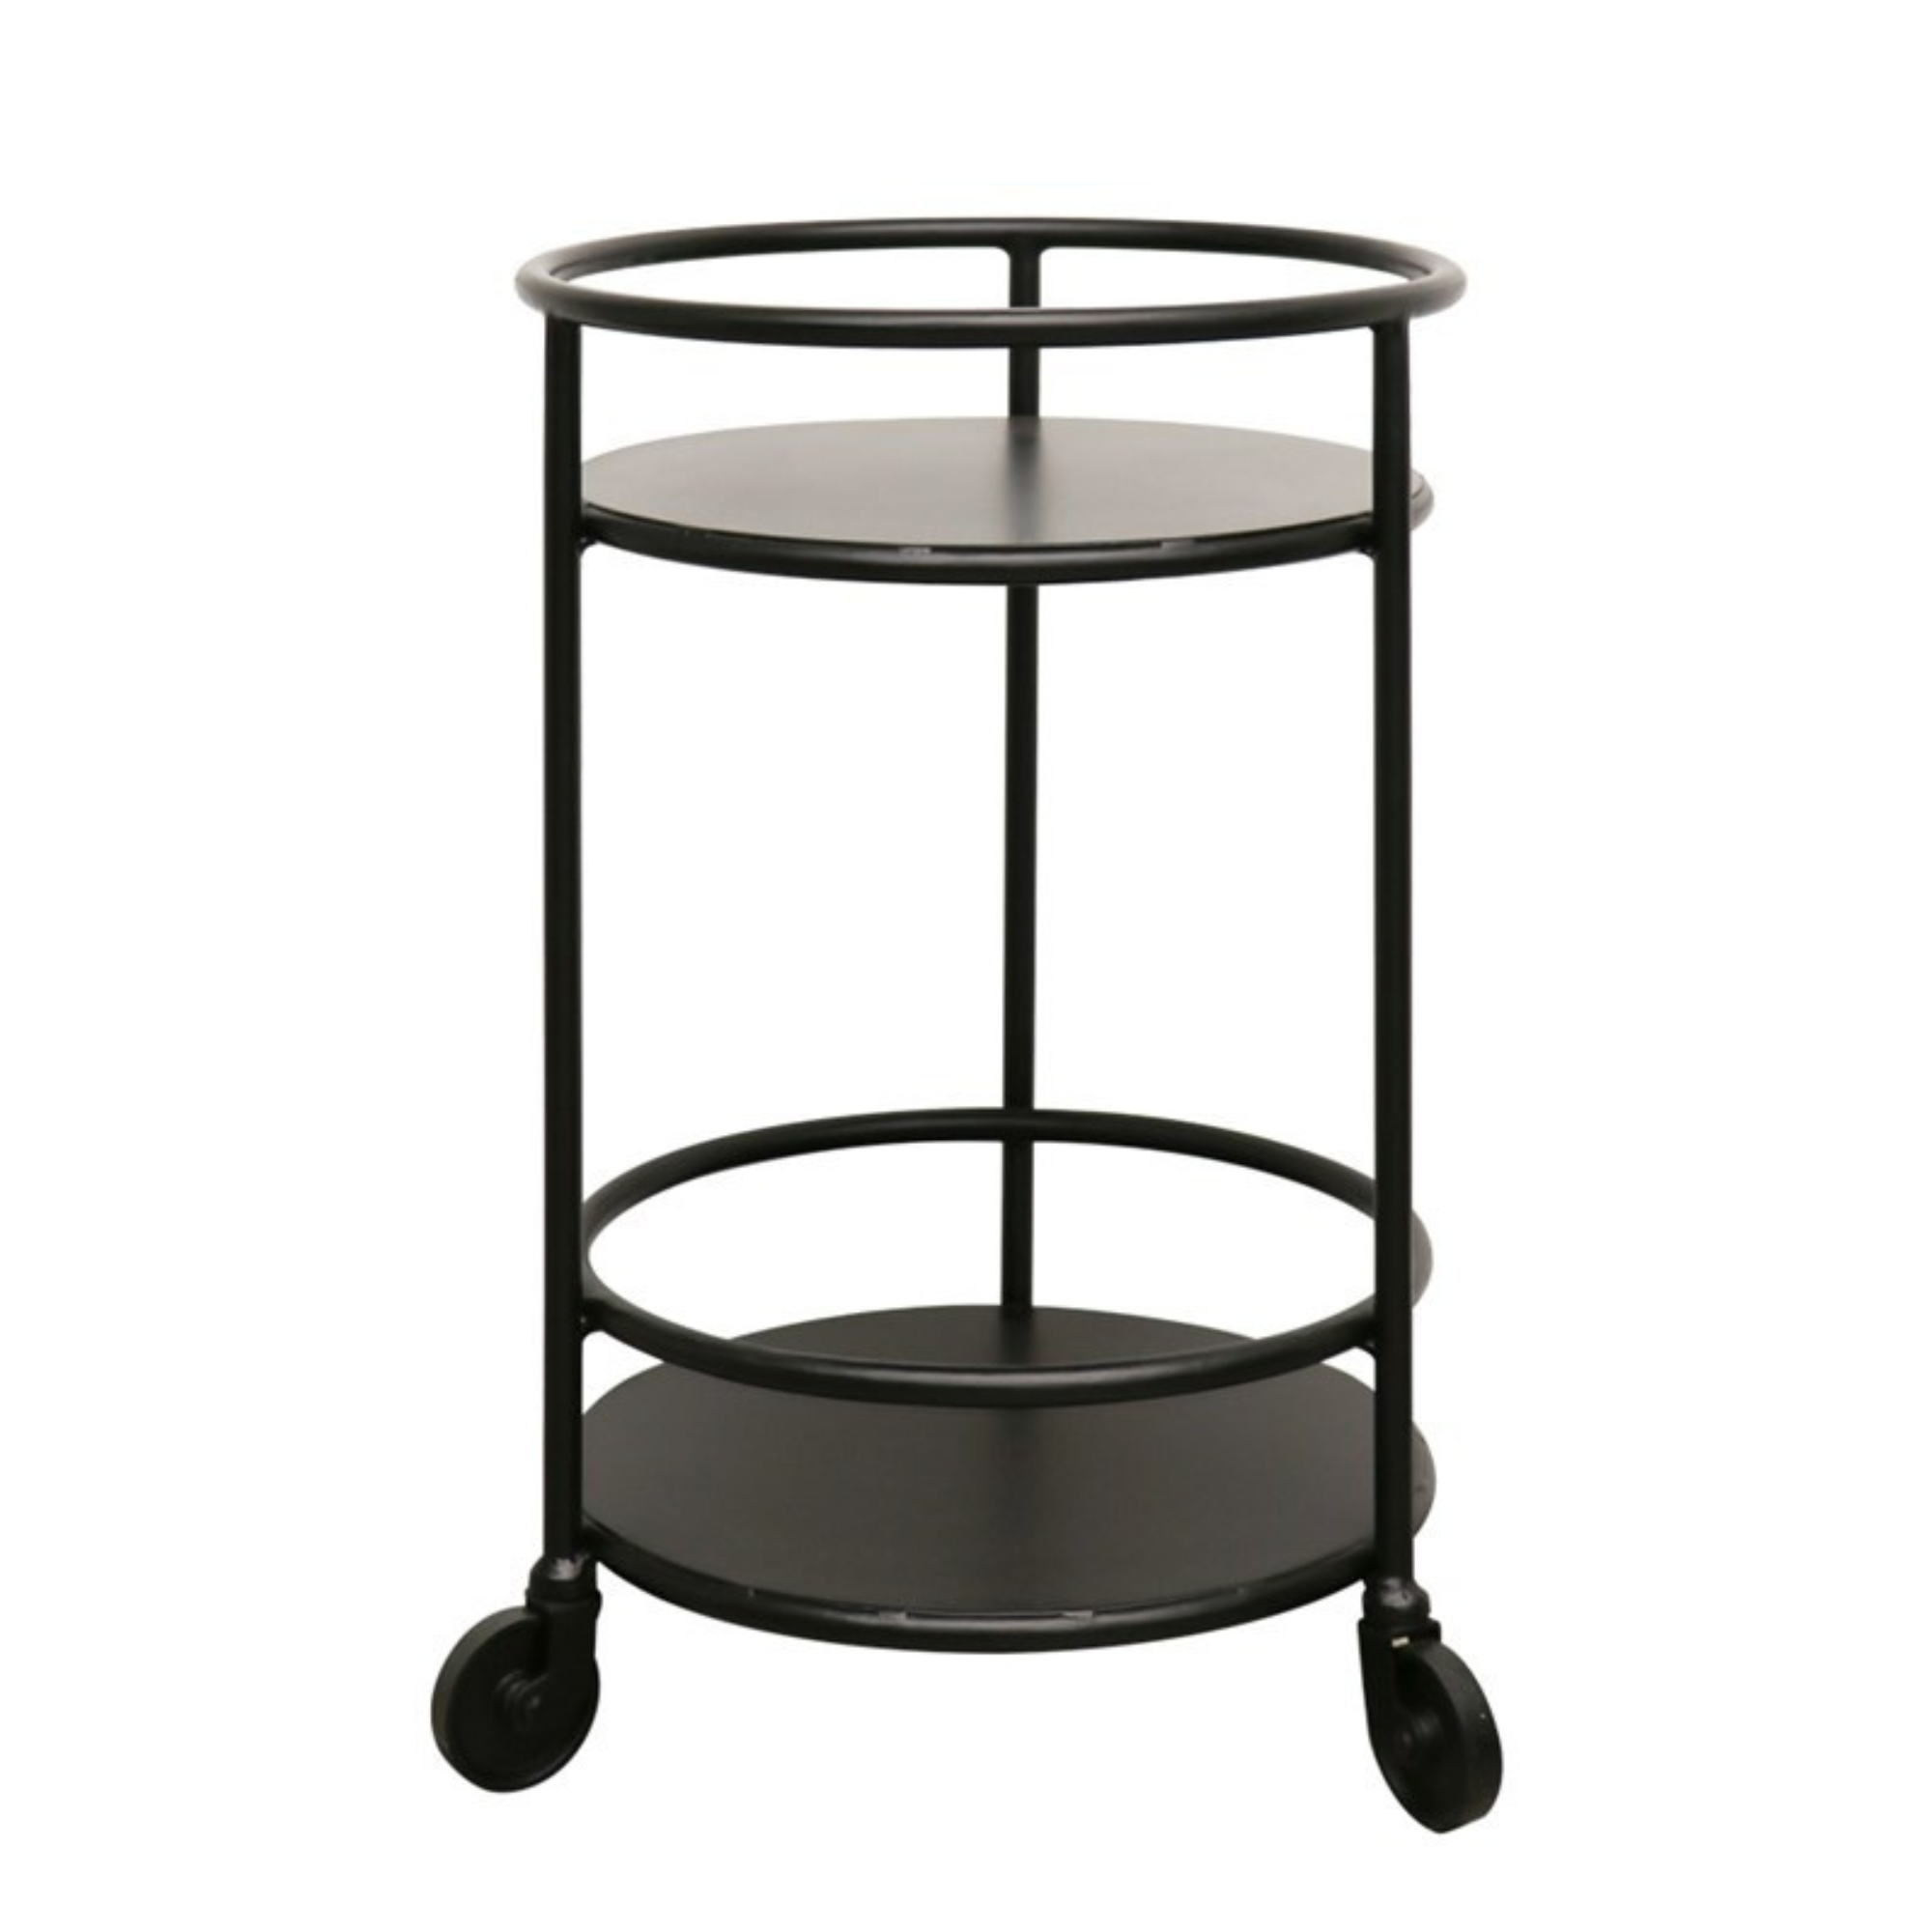 CARSON ROUND SIDE TABLE - 2 TIER